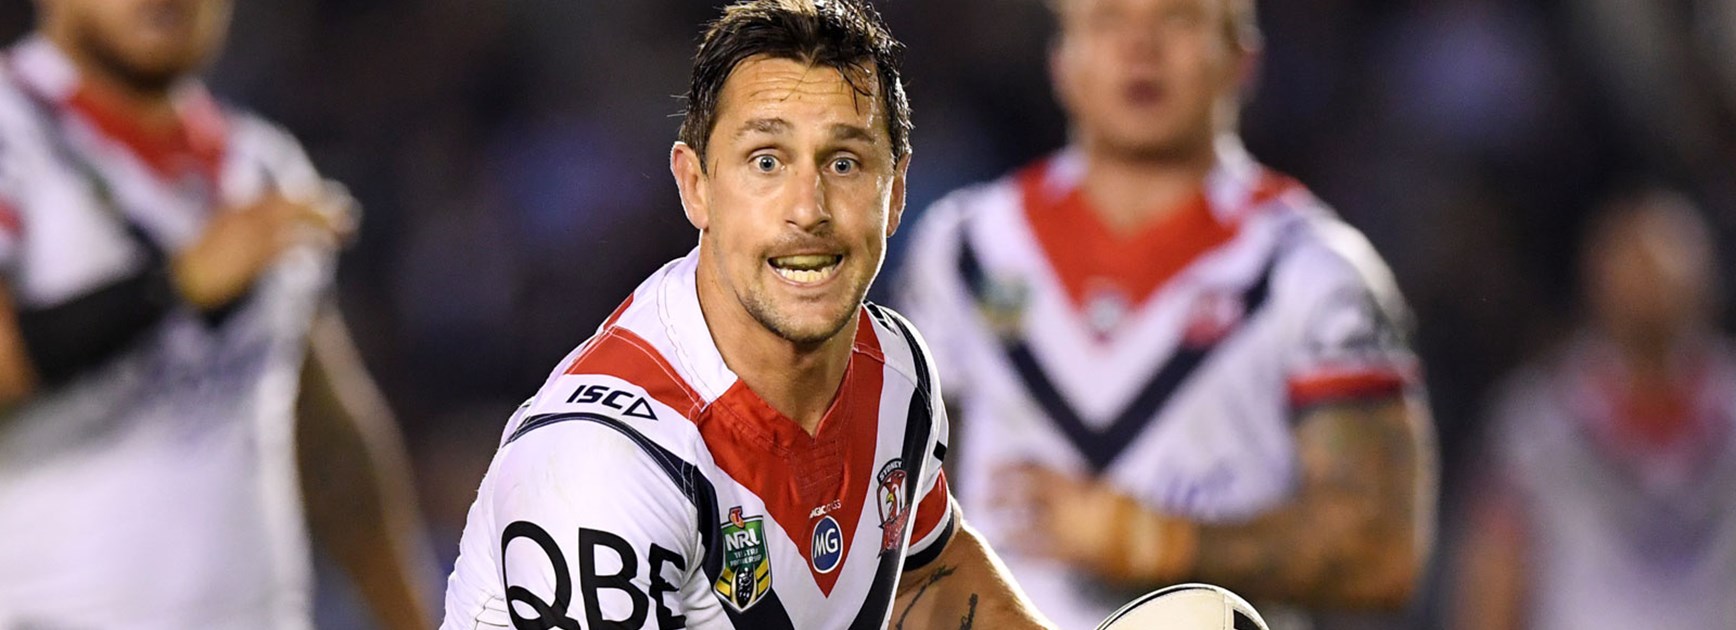 Mitchell Pearce during his final season as a Rooster in 2017.